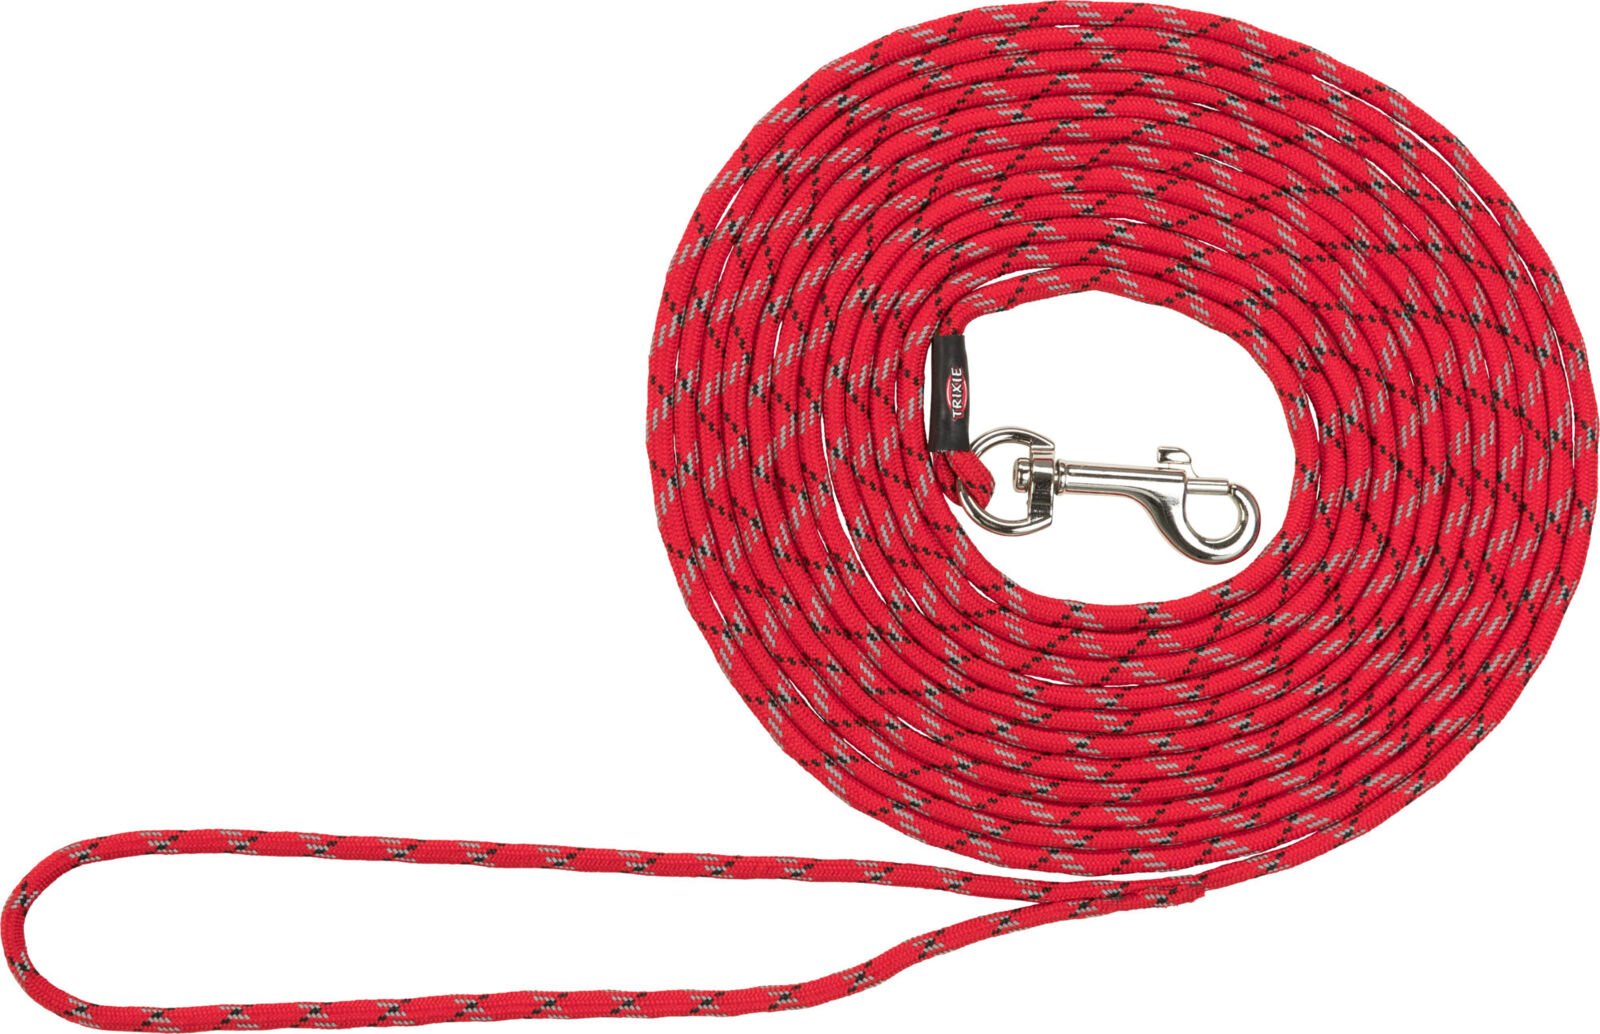 JUNIOR PUPPY TRACKING LEASH XXS-XS 4M/4MM RED